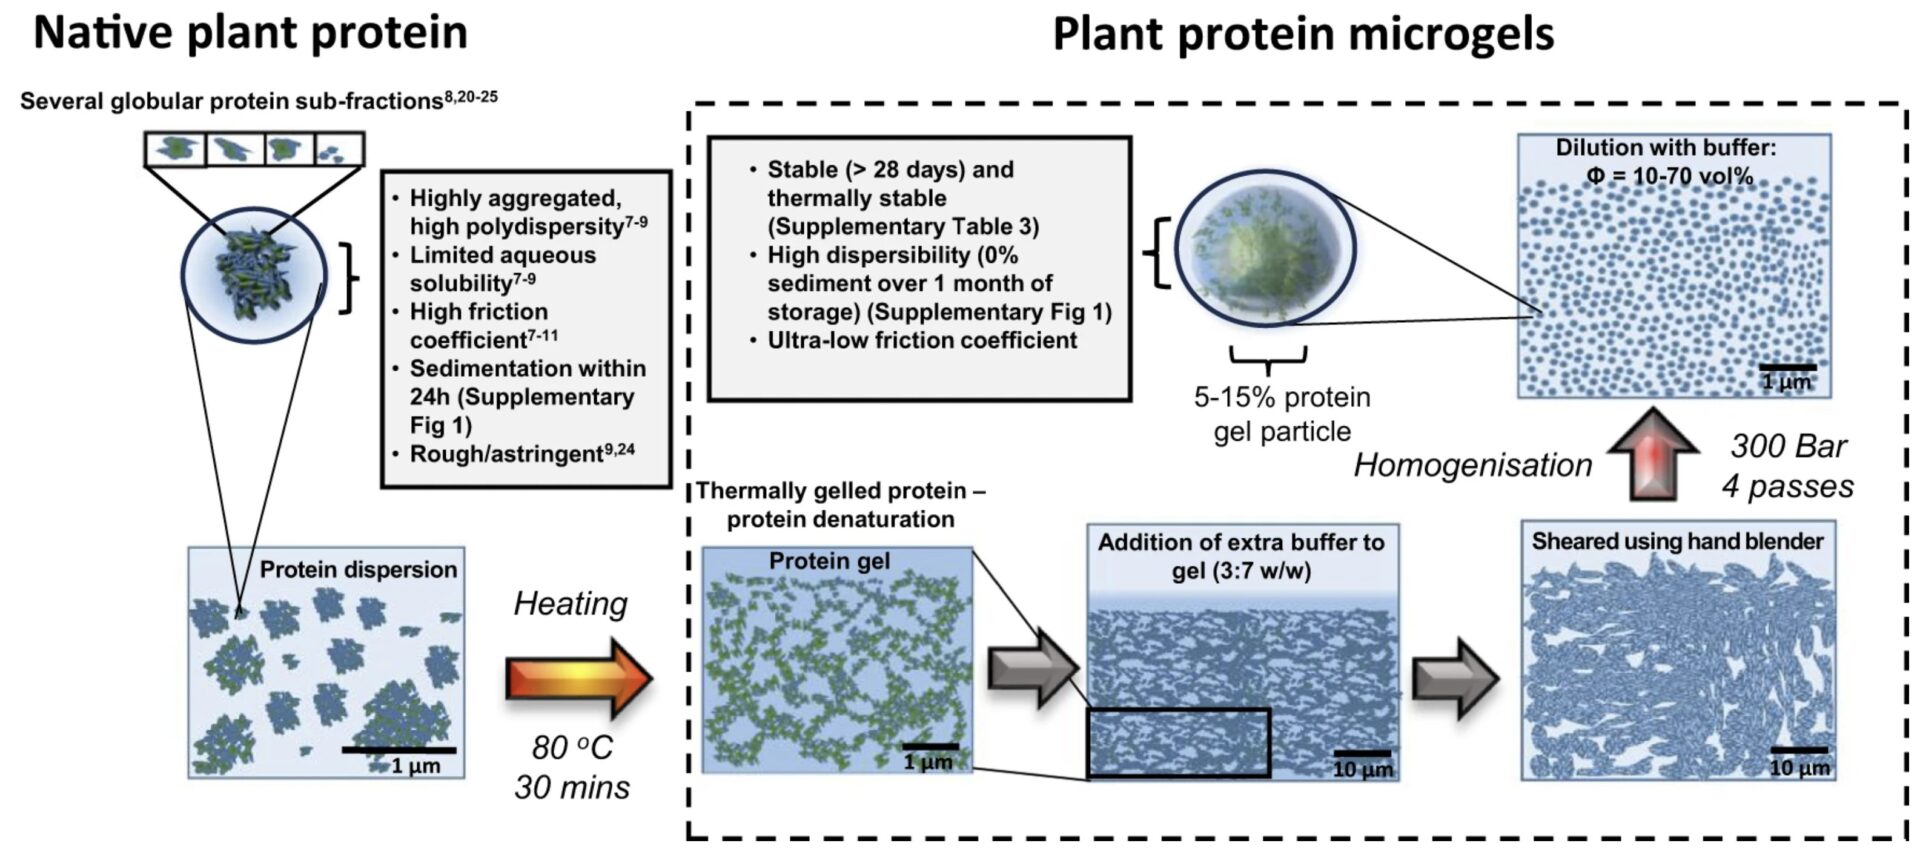 Ben Kew publishes his new work on plant protein-based microgels in Nature Communications